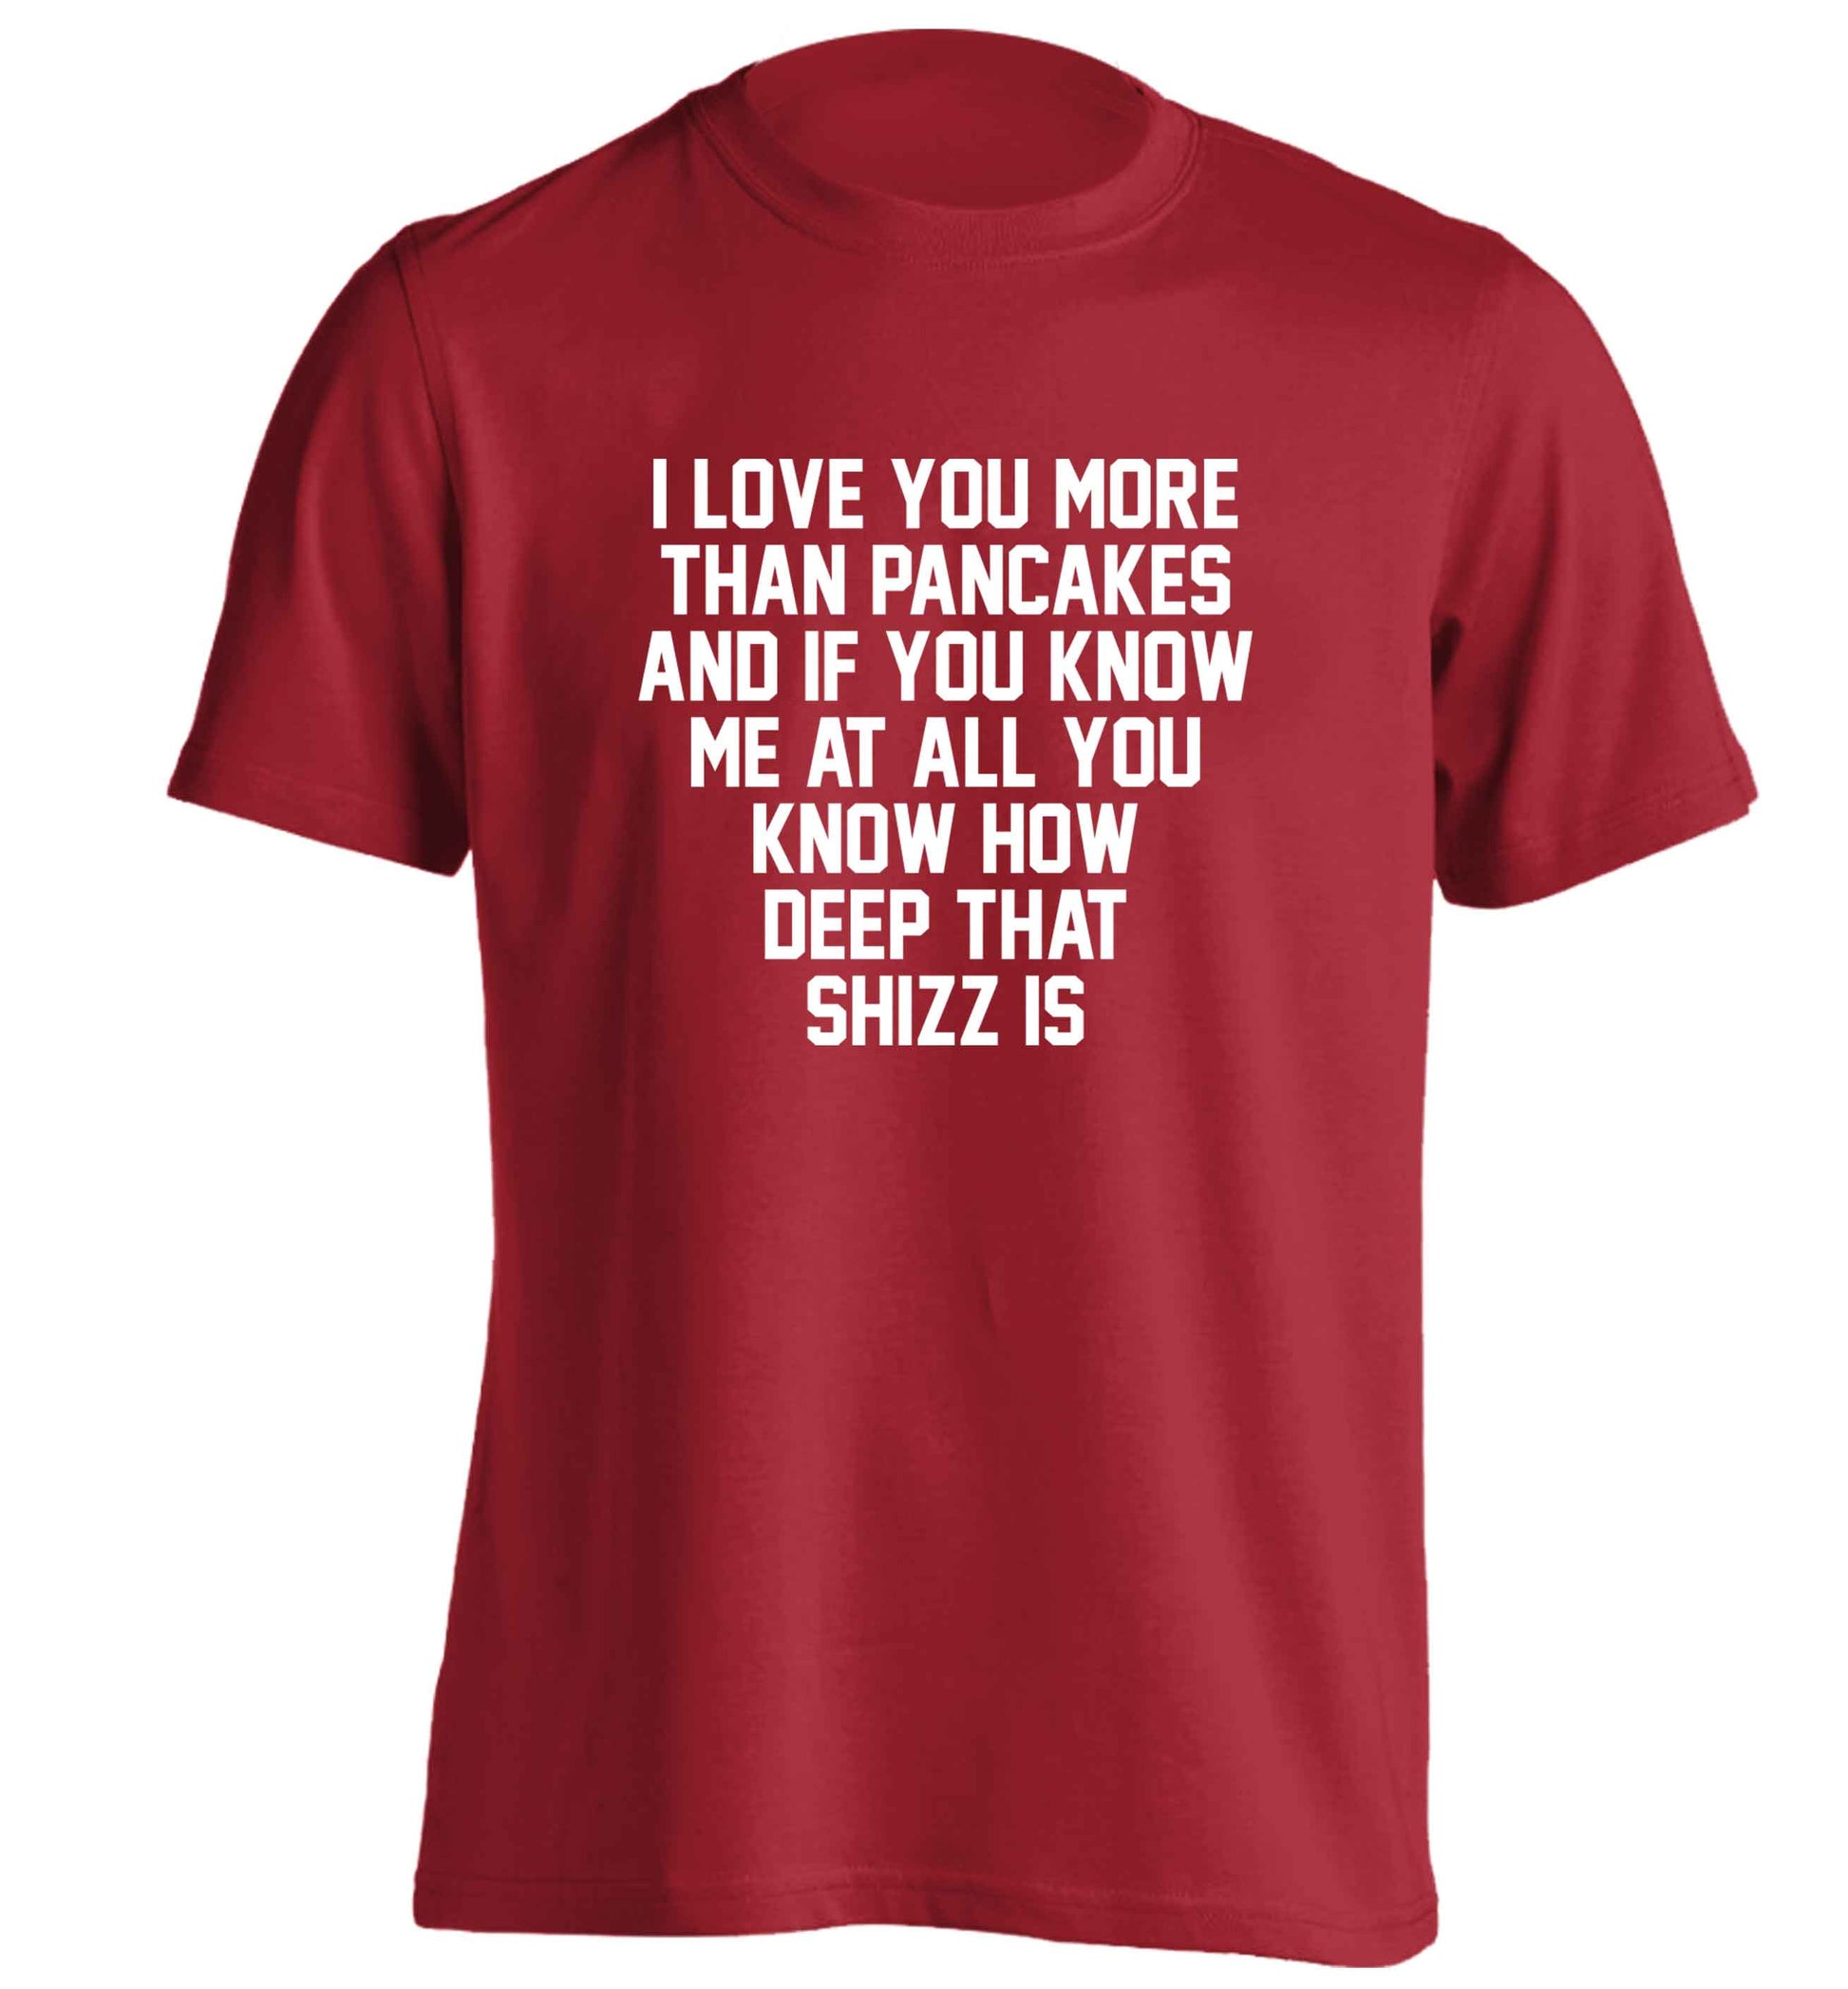 I love you more than pancakes and if you know me at all you know how deep that shizz is adults unisex red Tshirt 2XL